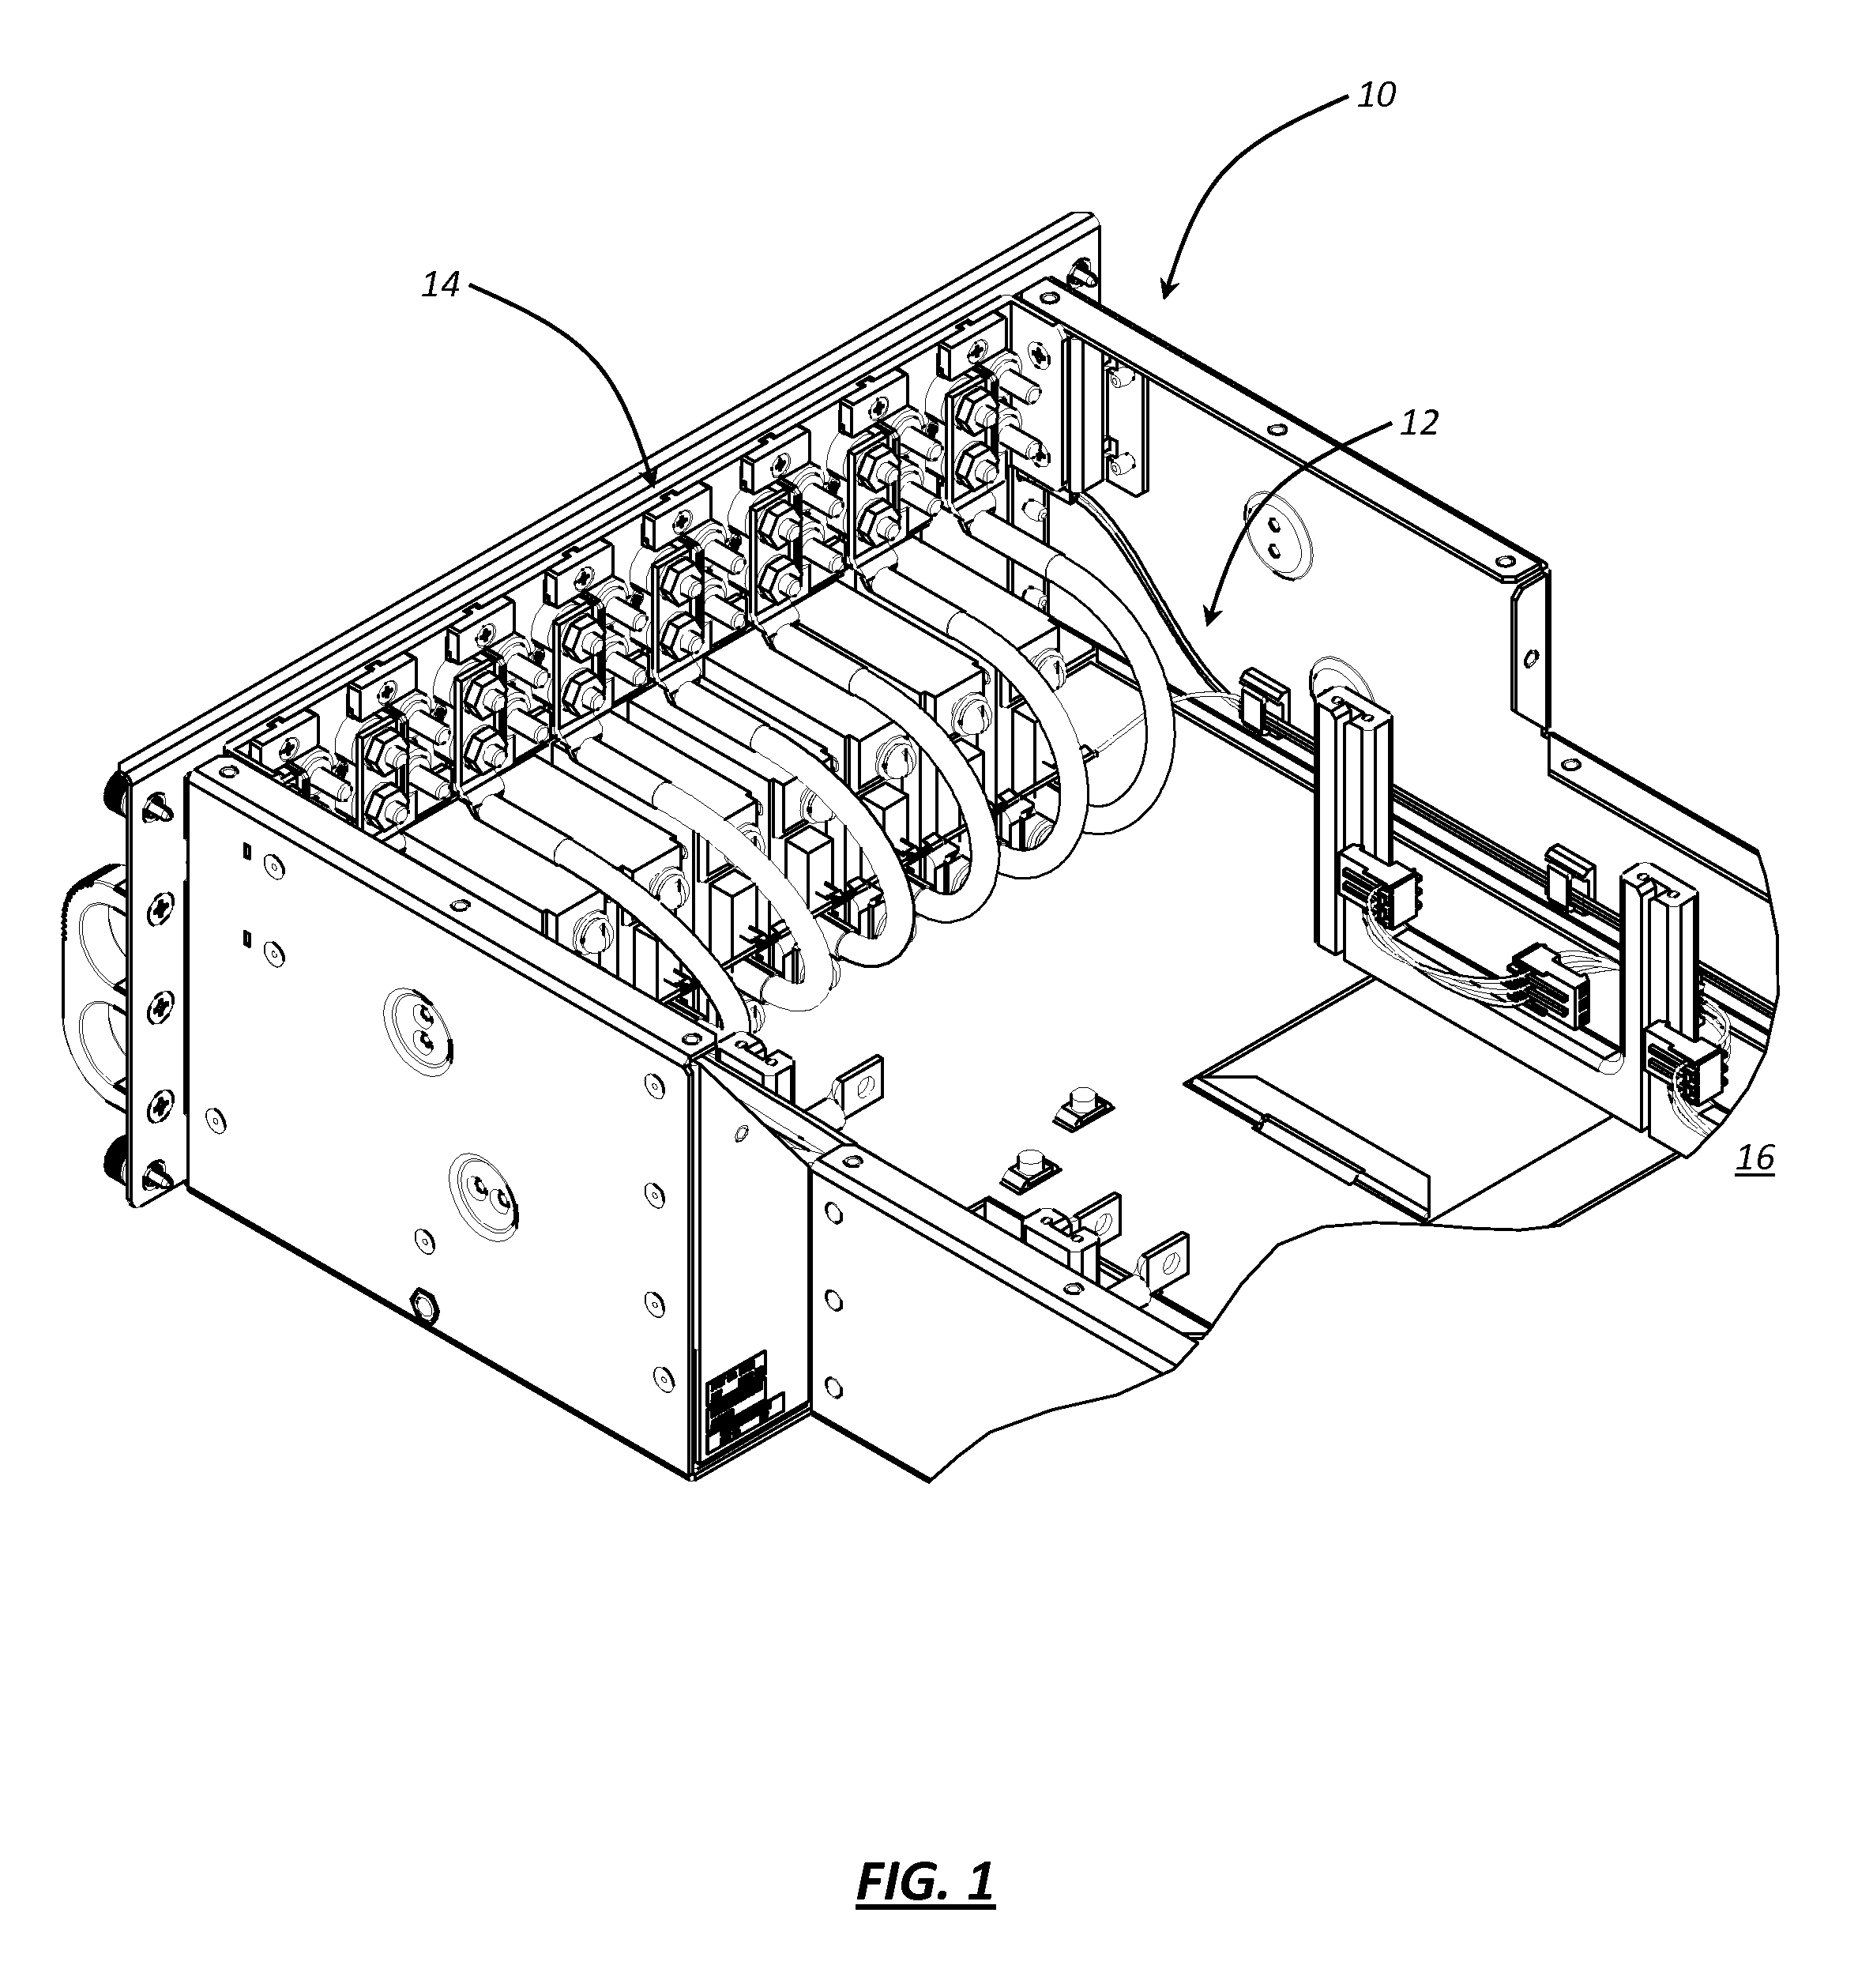 Routing assembly for wires in electronic assemblies and the like